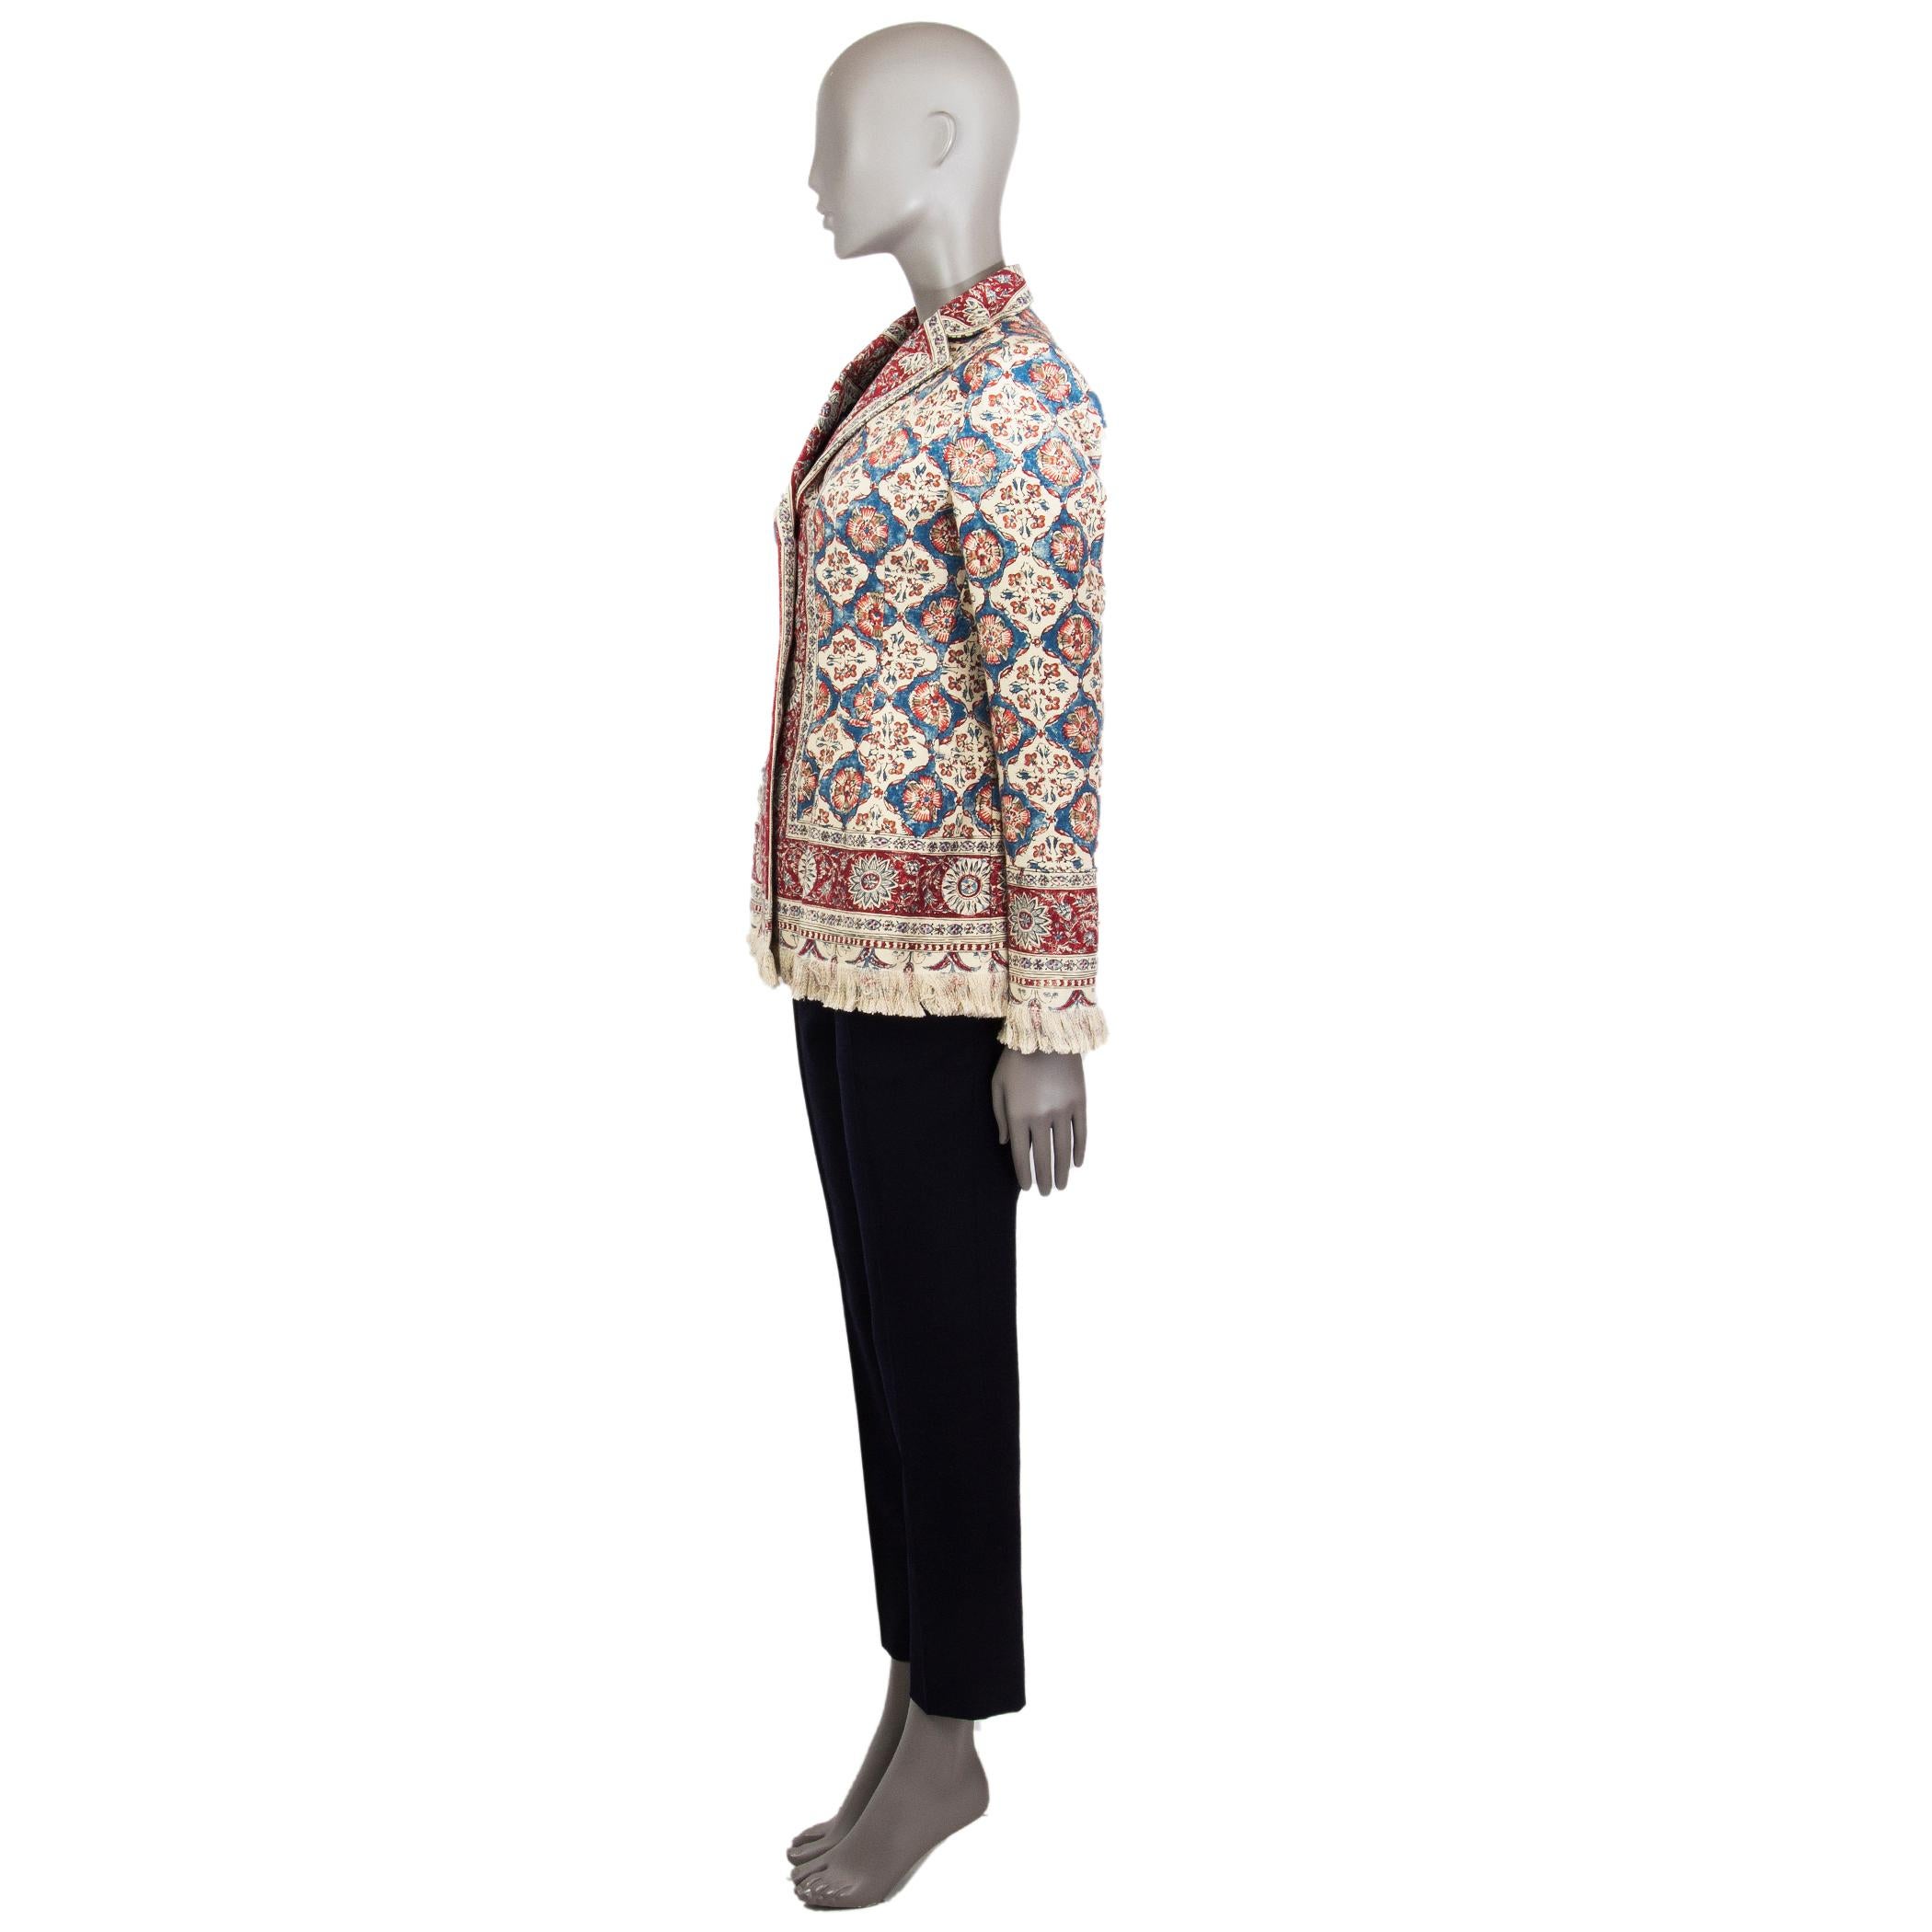 Christian Dion oriental print blazer in cherry red, red, aegean blue, charcoal, sand, brown-beige linen (100%) with a step collar, single breasted, two open pockets. Buttoned cuffs, fringed hemline and sleeves. Closes with buttons in the front.